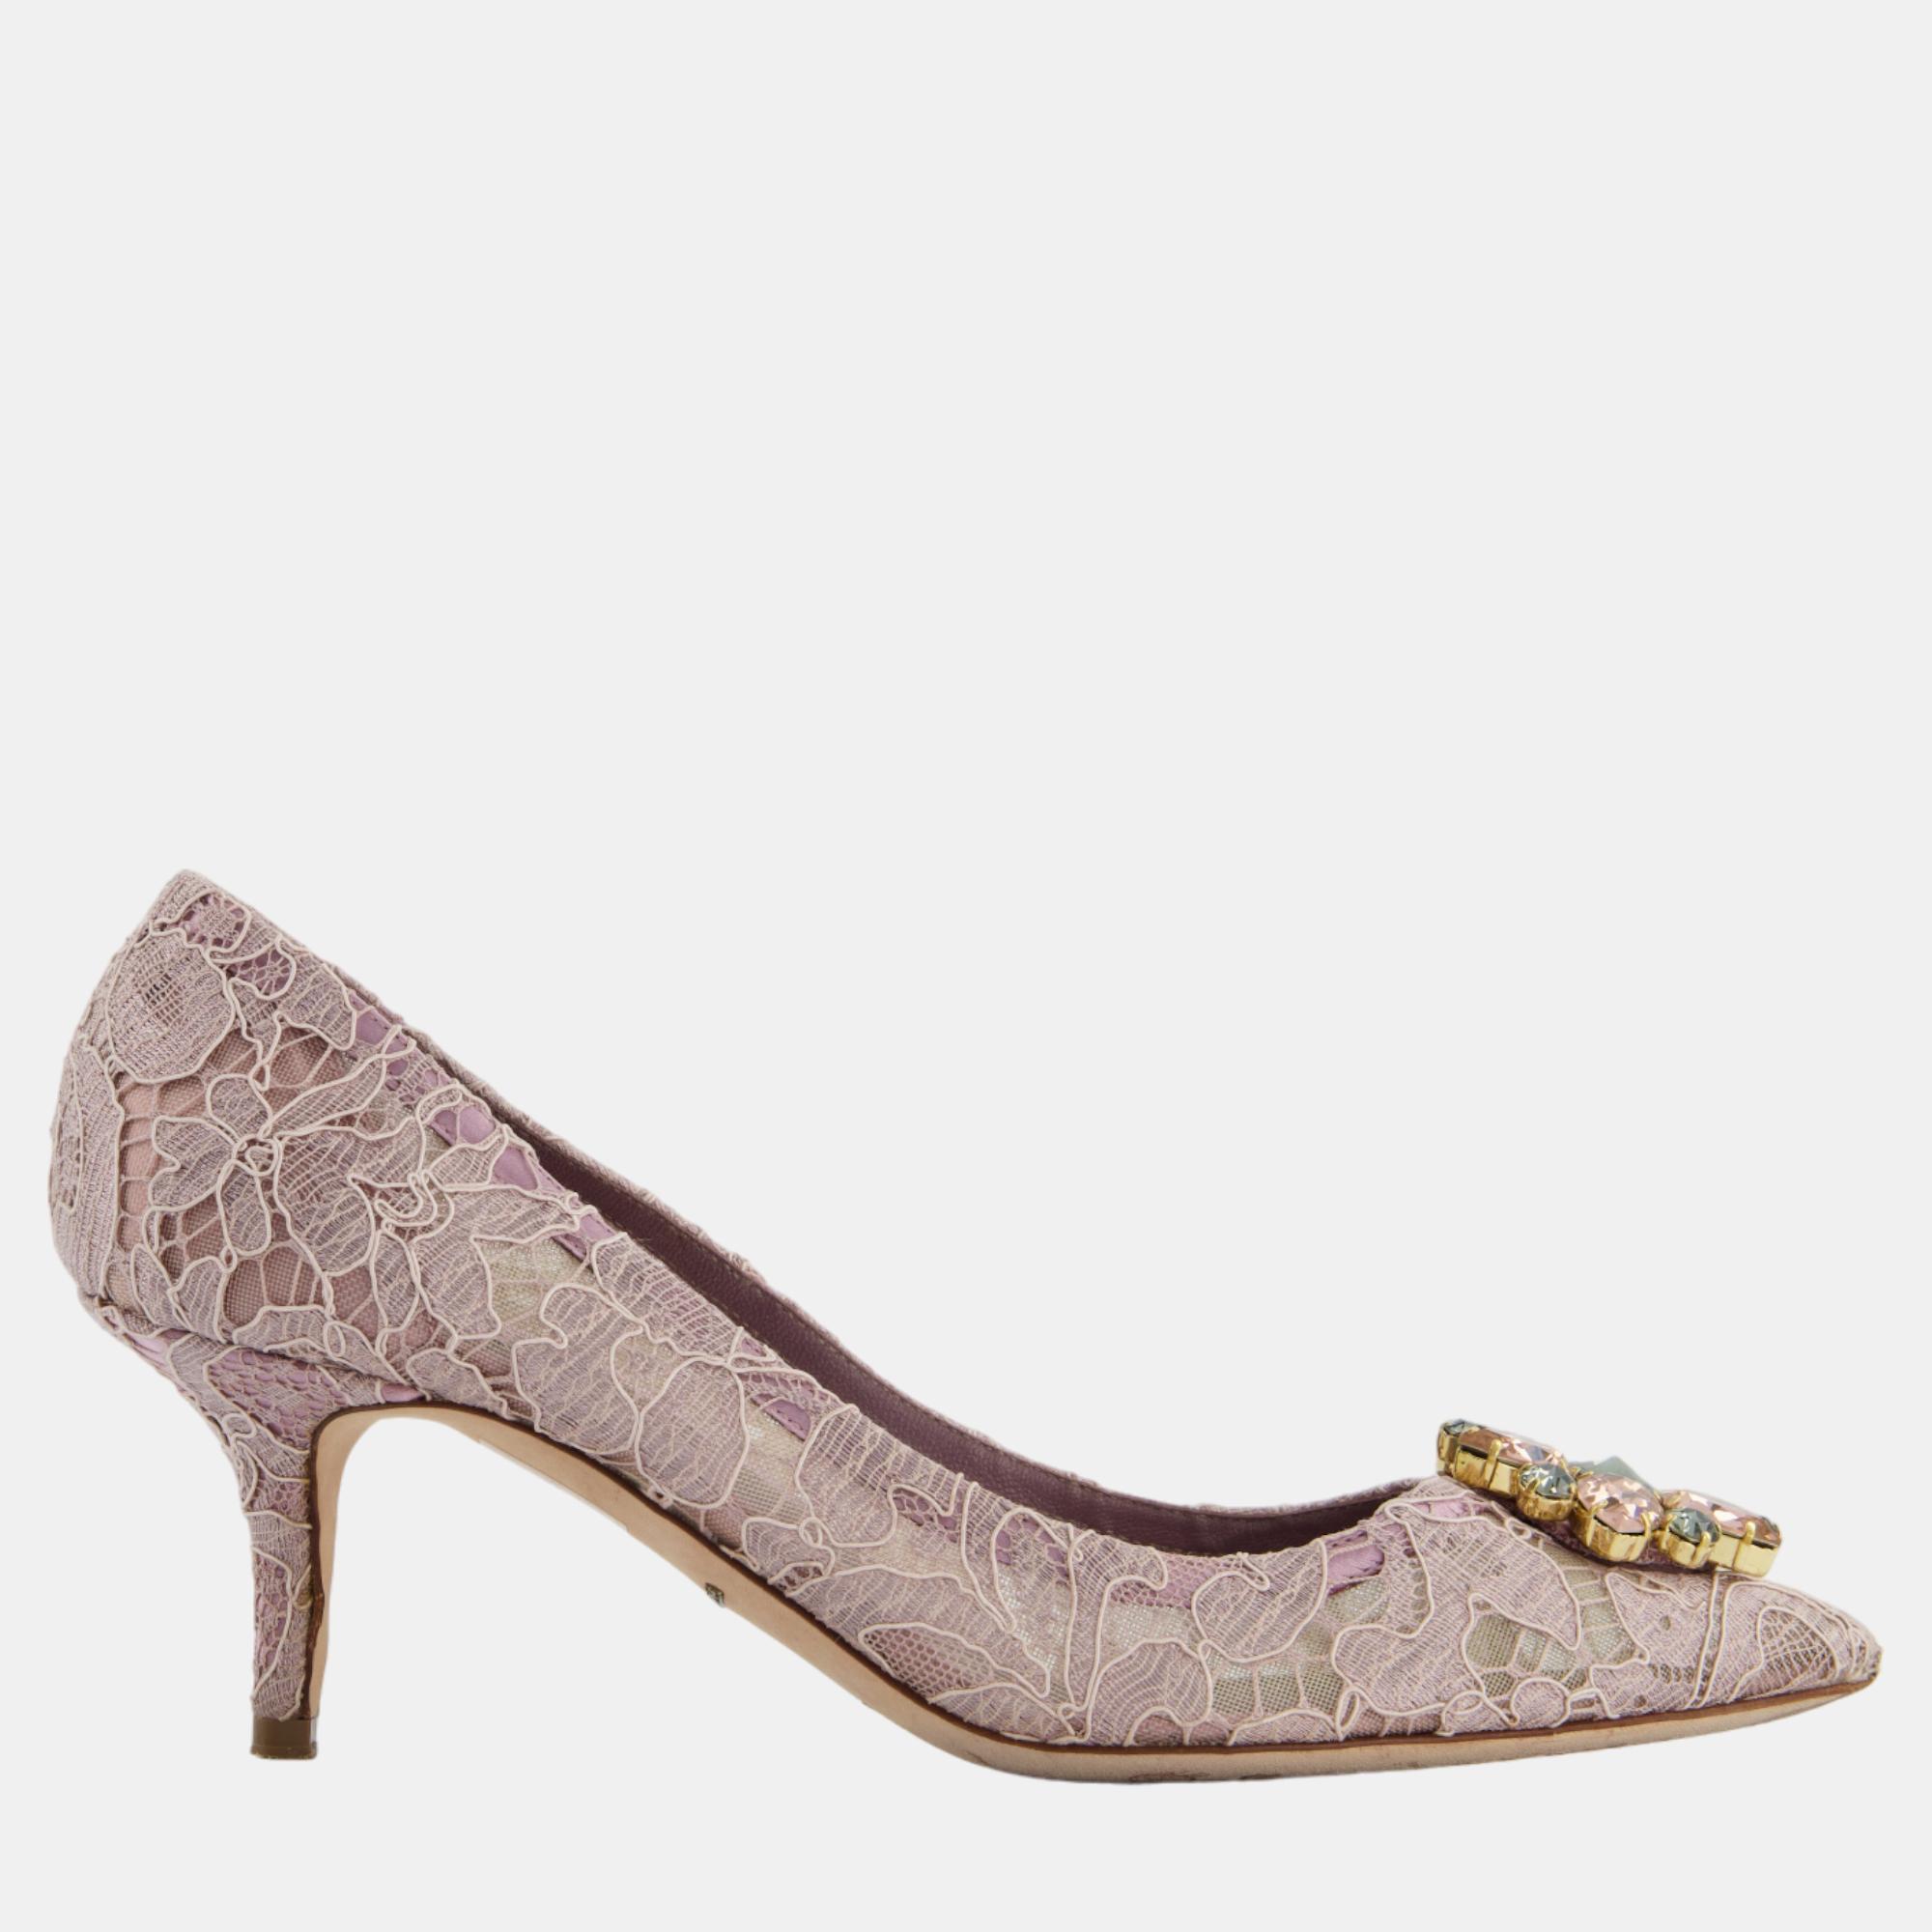 Dolce & gabbana lilac lace heels with crystal flower detail size eu 40